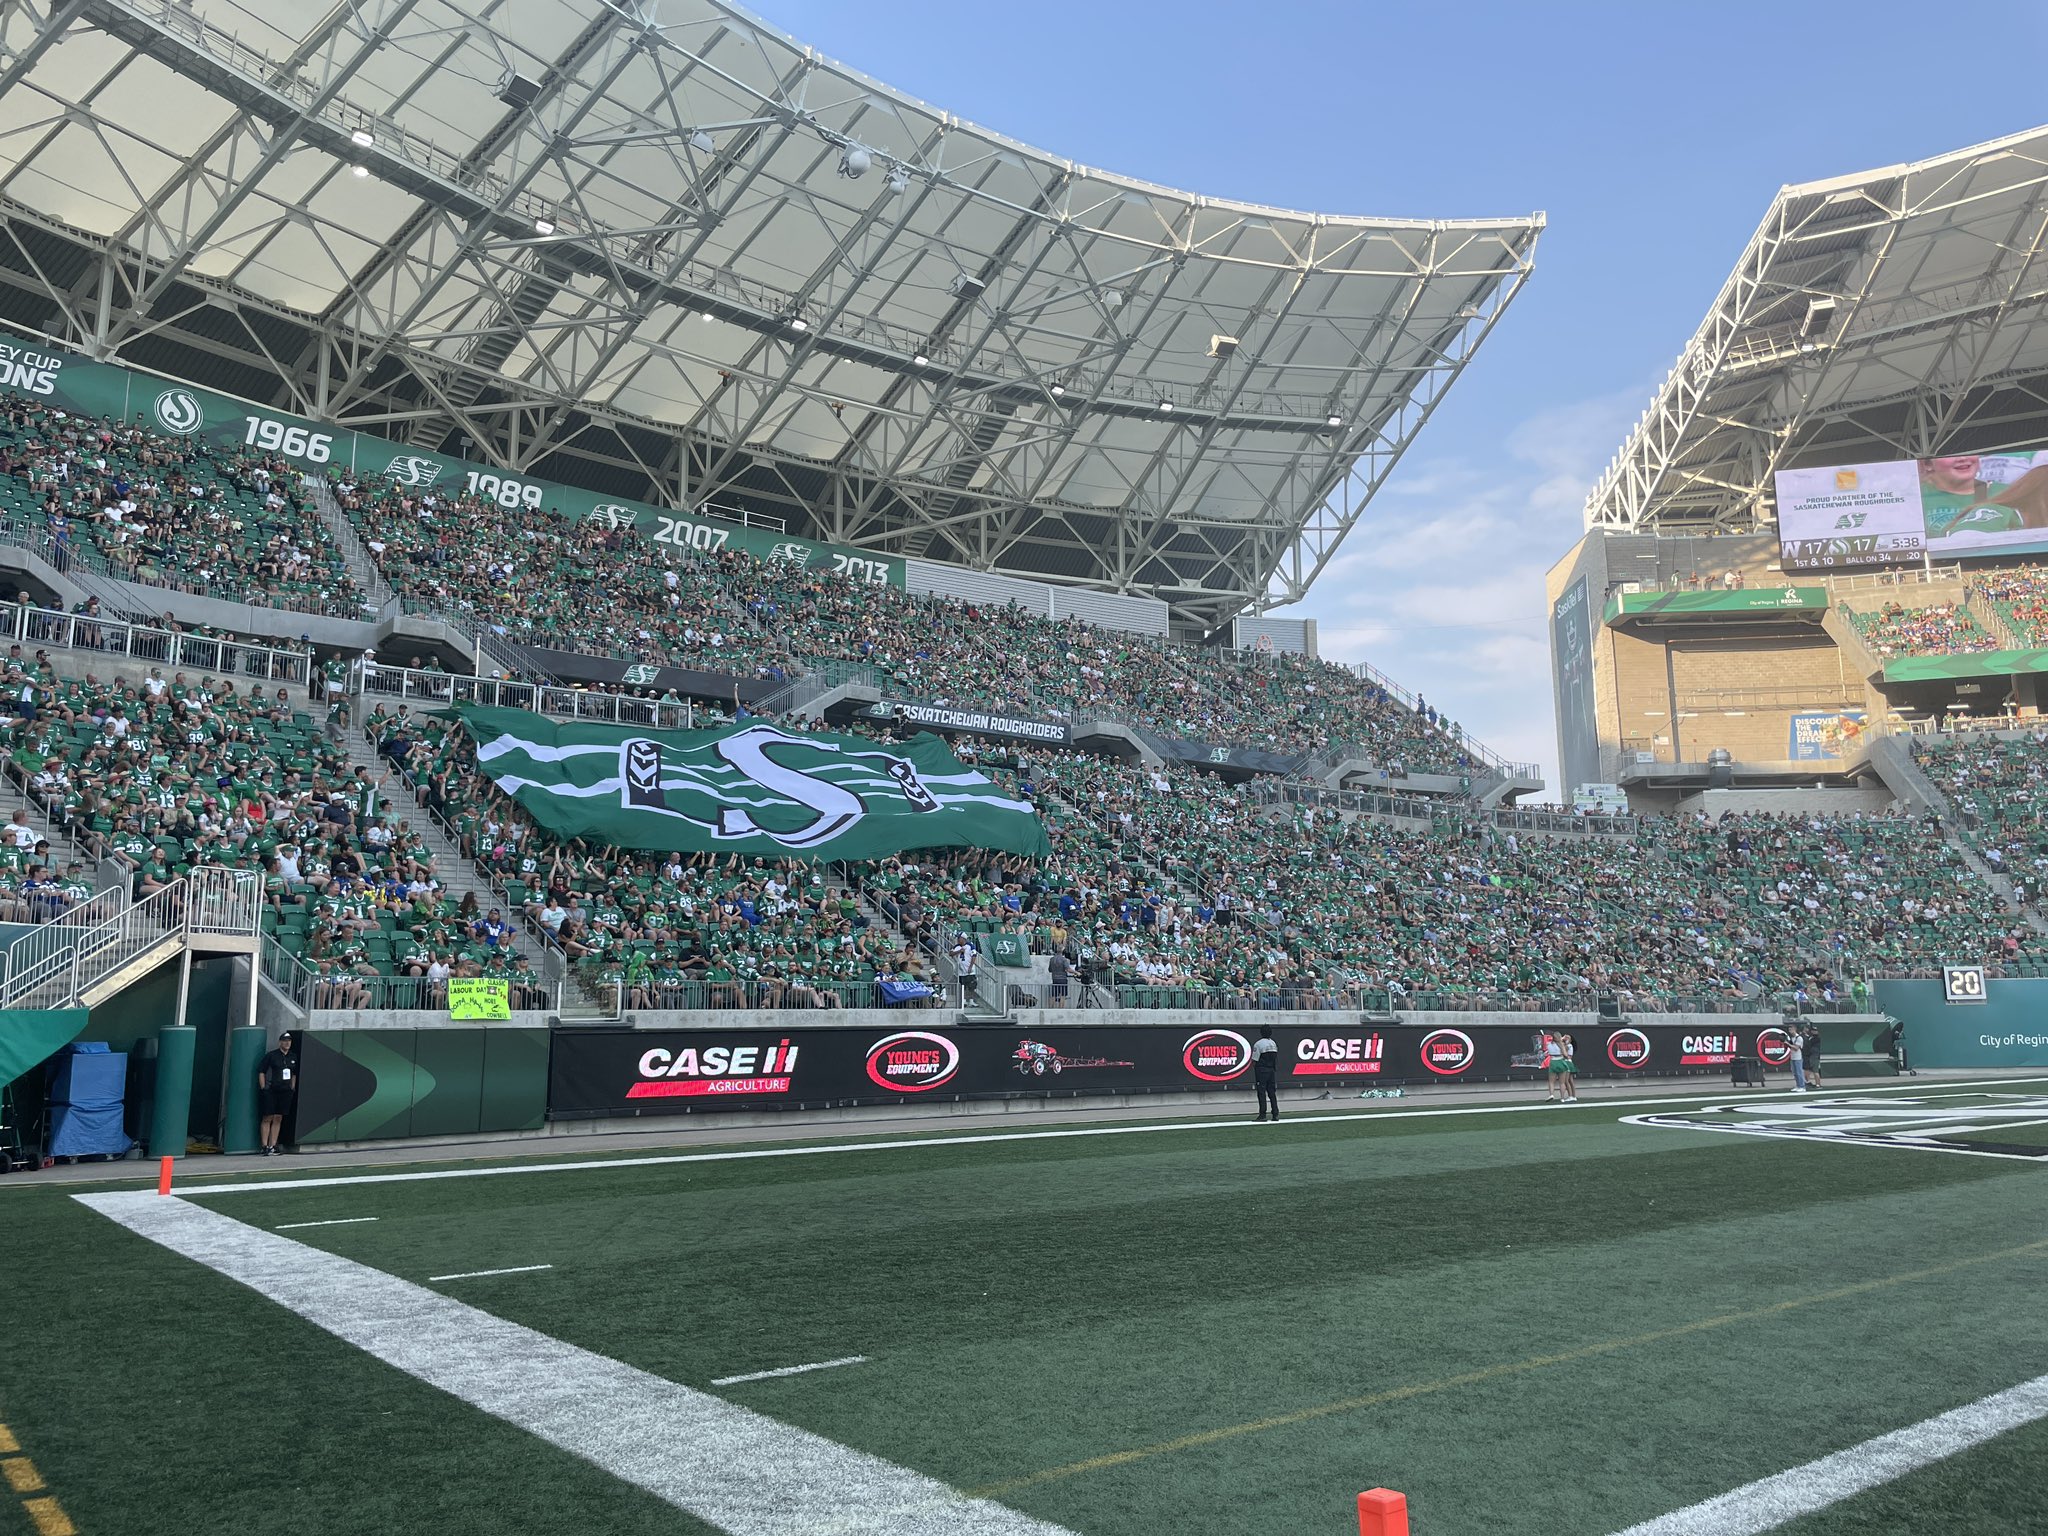 Canada mass stabbing: Security tightened at Saskatchewan Roughriders Canadian football game